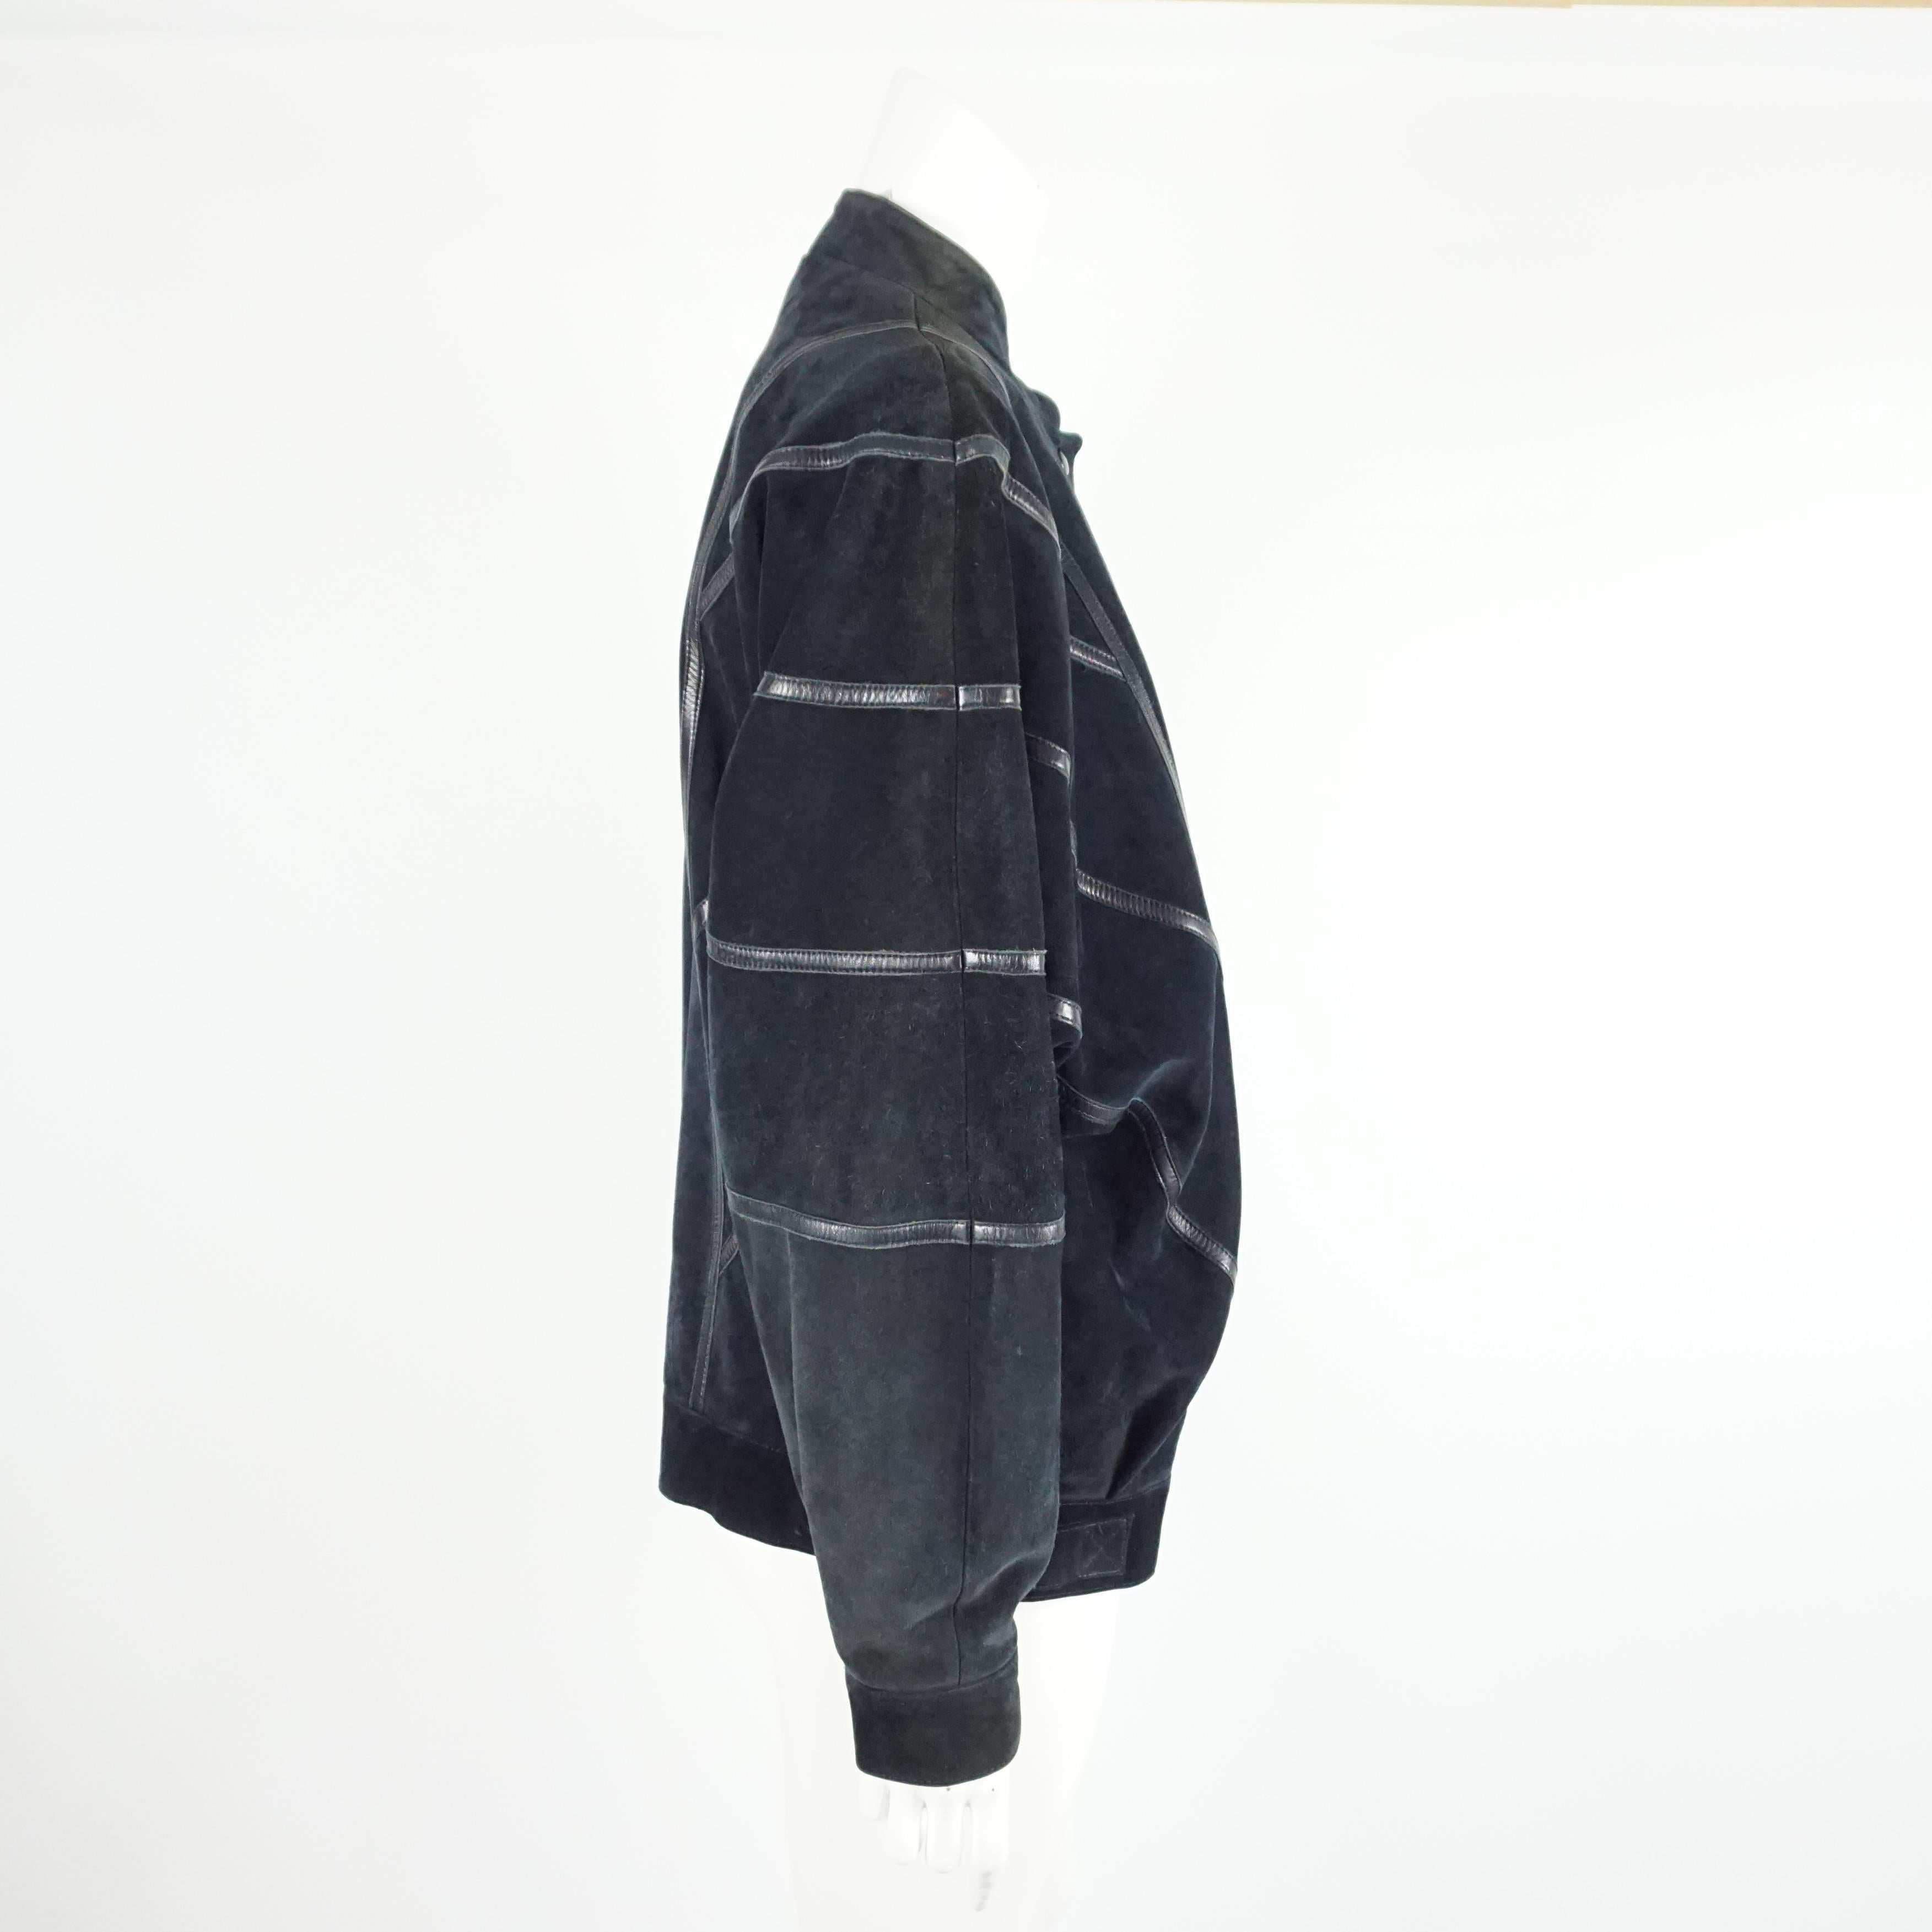 This Celine navy suede jacket has an oversize fit and has leather stripe detailing all over. The jacket also features snap buttons. It is in fair vintage condition with discolorations and marks to the suede as seen in the last images. Size 42, circa